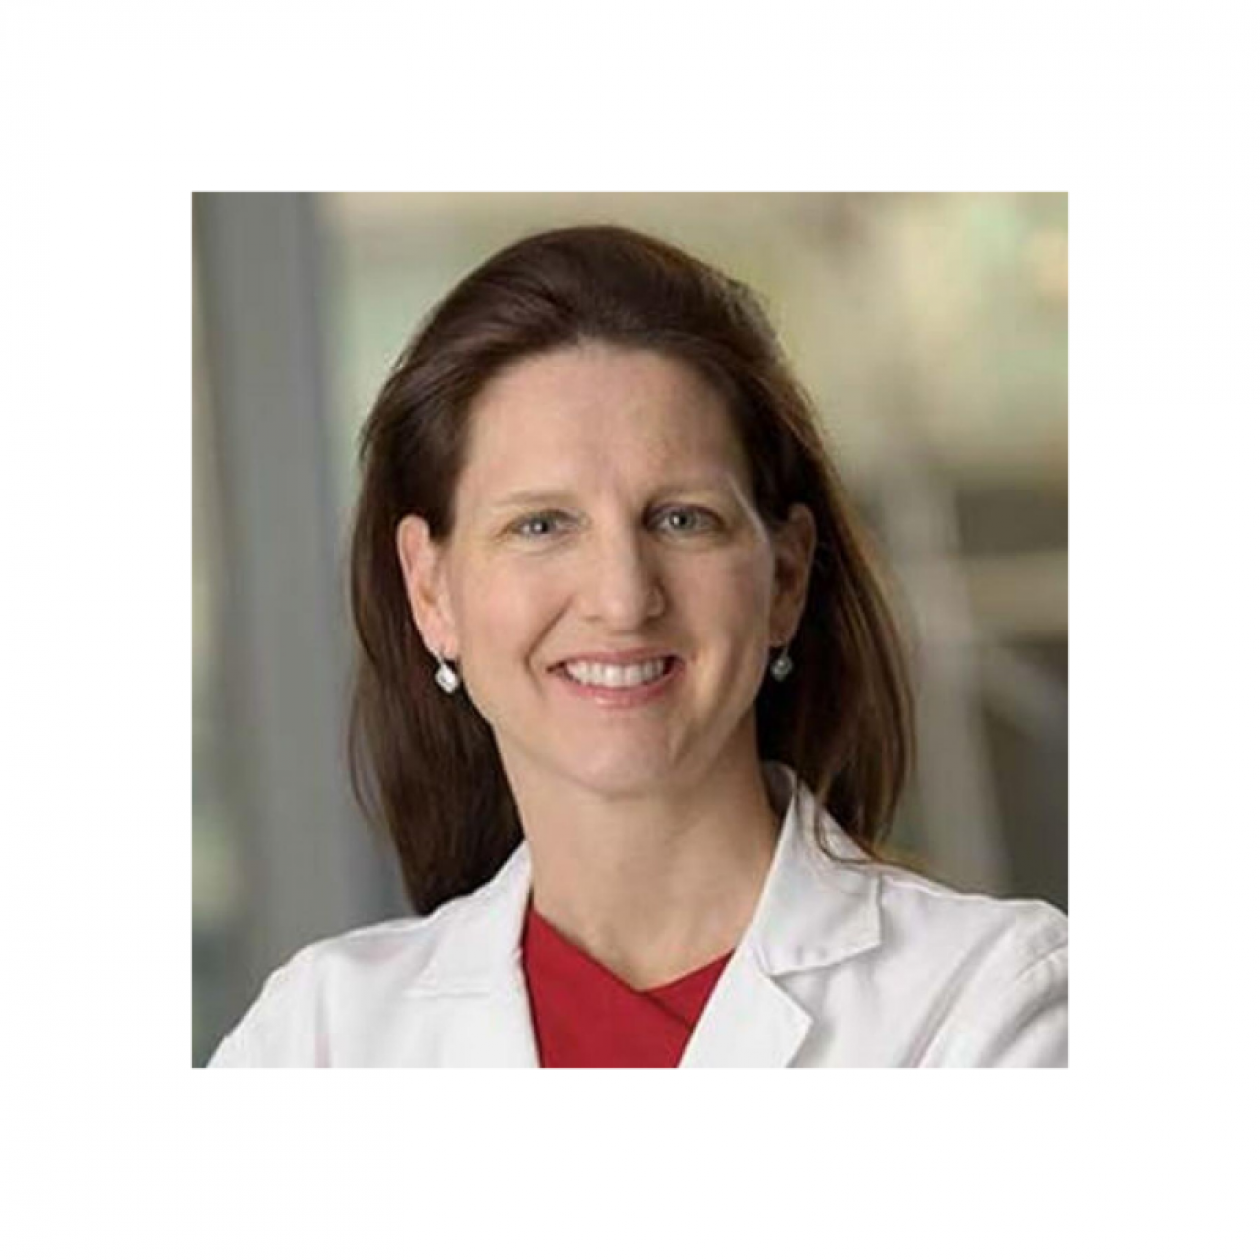 Headshot of Dr. Kathryn Beal, a new Board Member. She is wearing a white coat with red shirt underneath, and has long brown hair, and is facing forward while smiling.